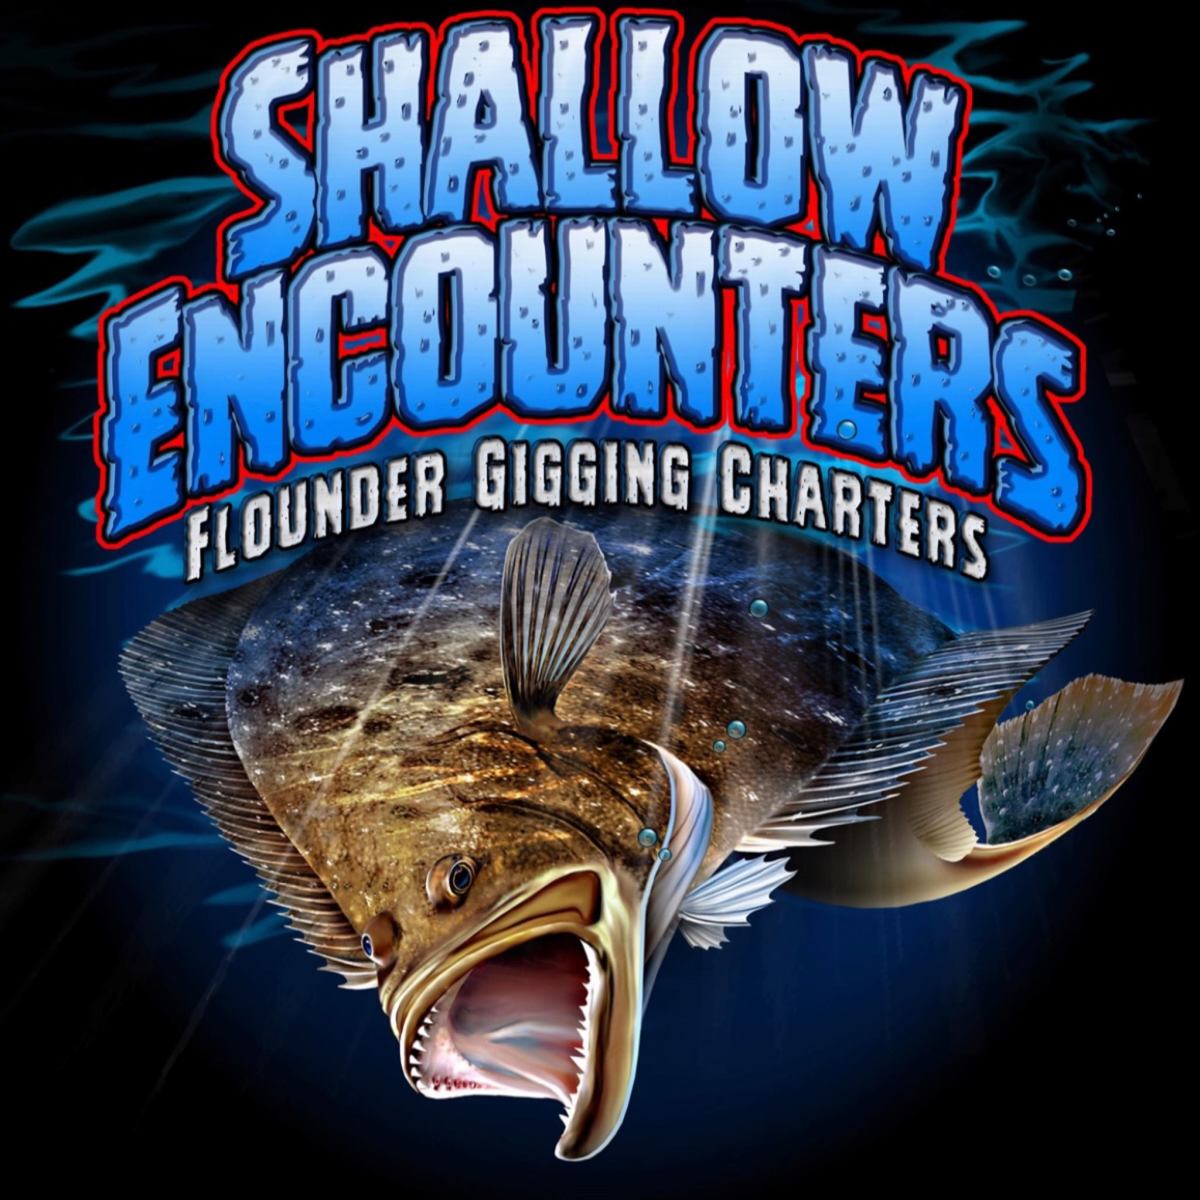 Shallow Encounters Flounder Gigging Charters · (832) 718-6760 -Booking-Typically replies within a few hours